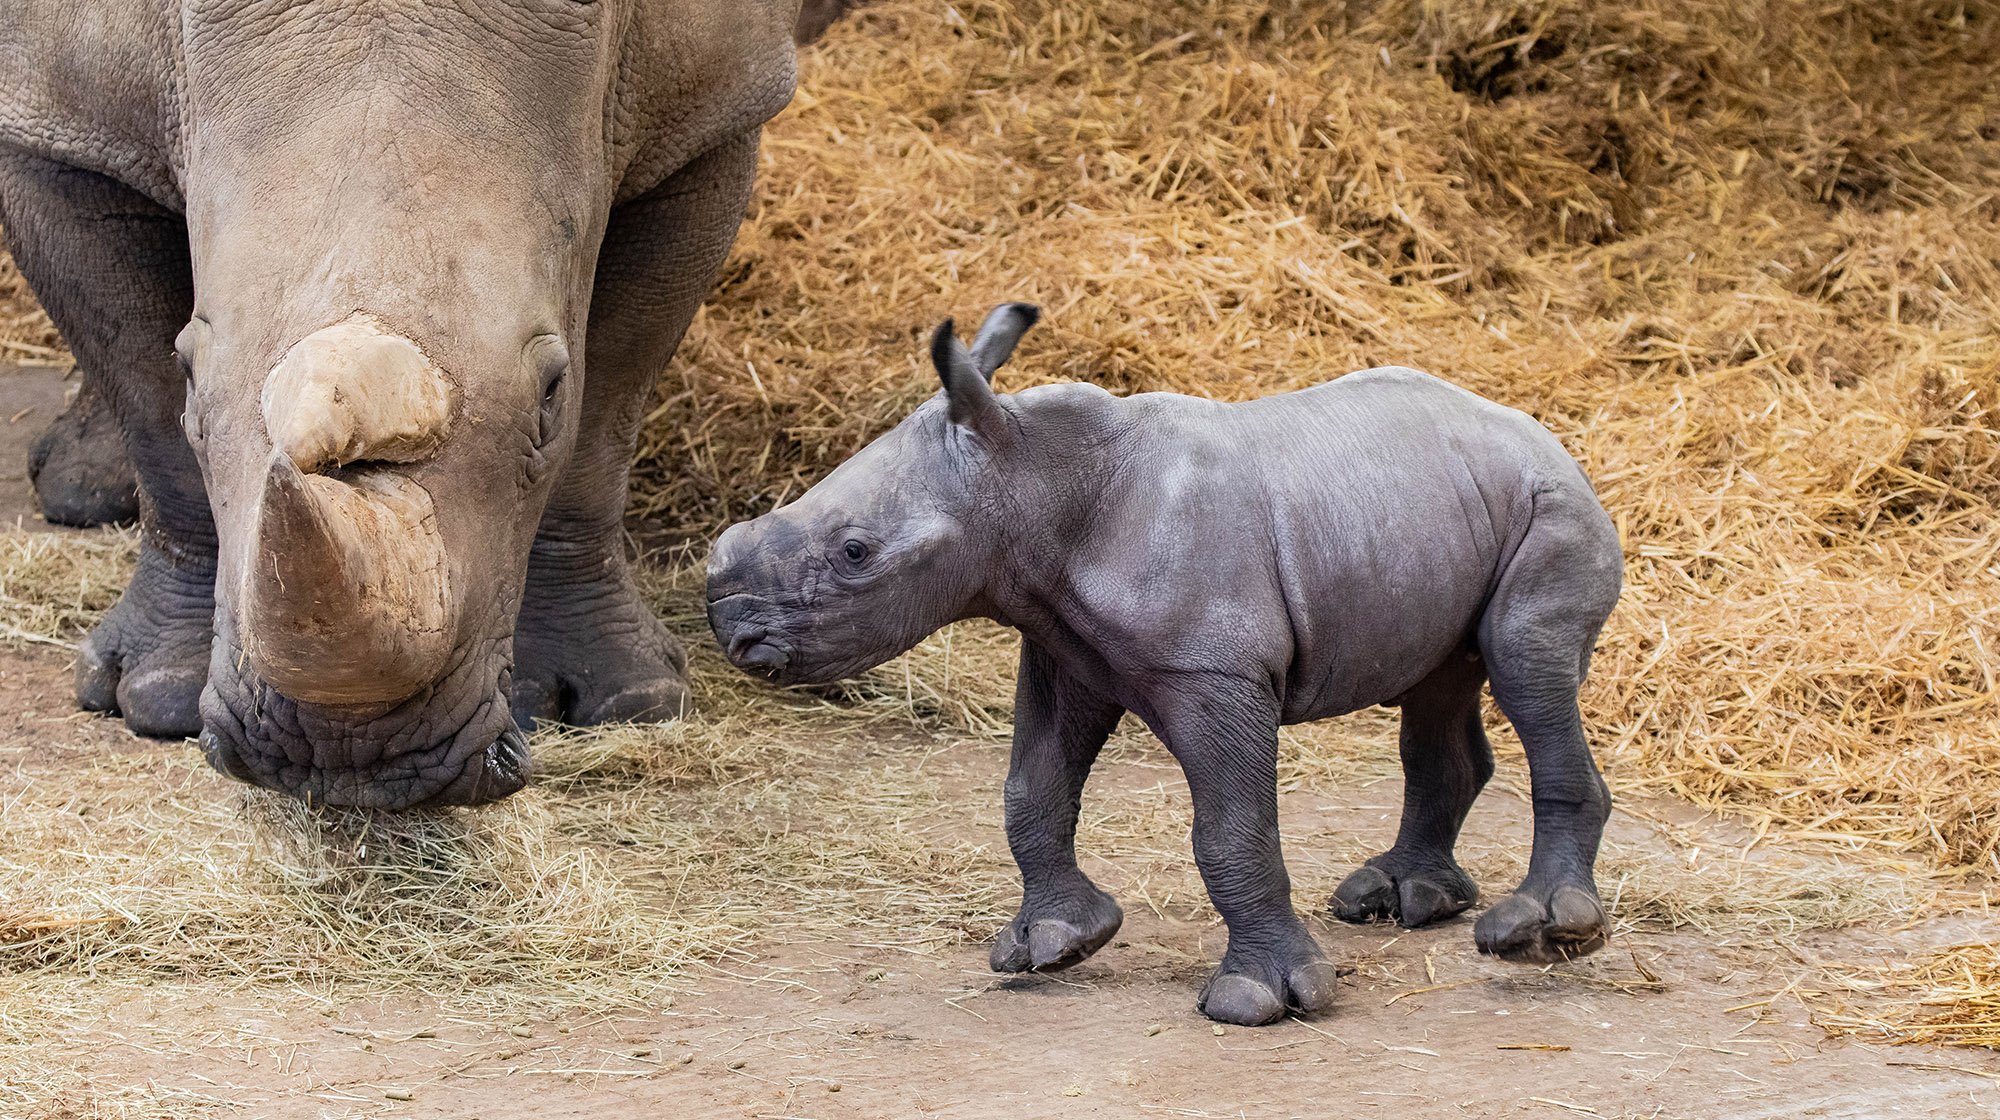 Whipsnade Zoo has welcomed a new rare white rhino!